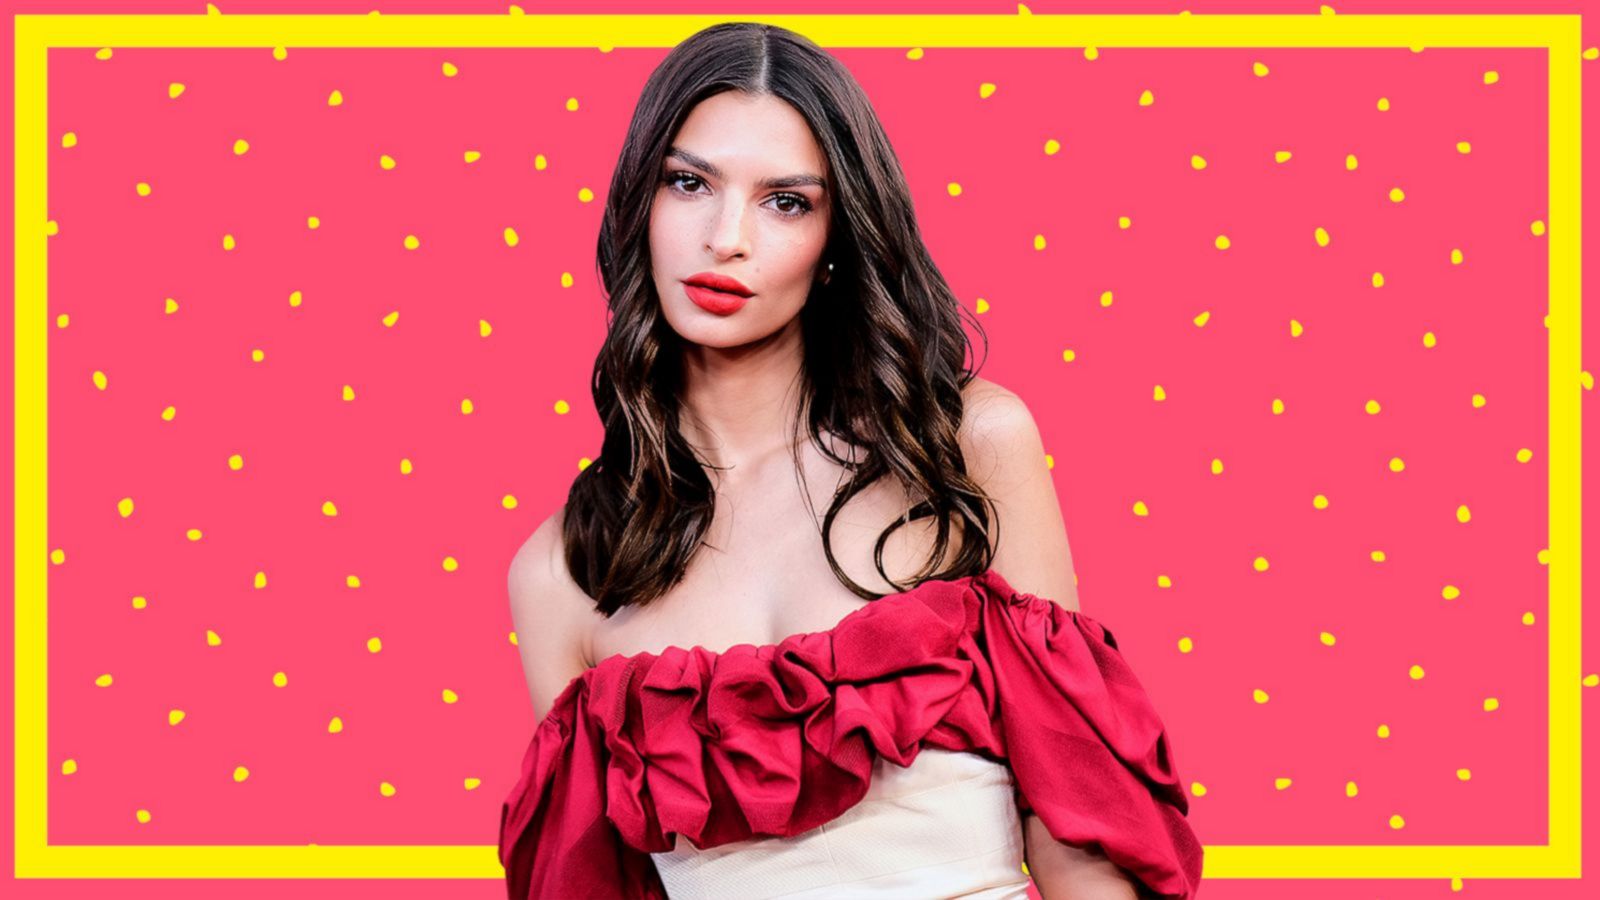 VIDEO: Model Emily Ratajkowski says people told her not to trust herself